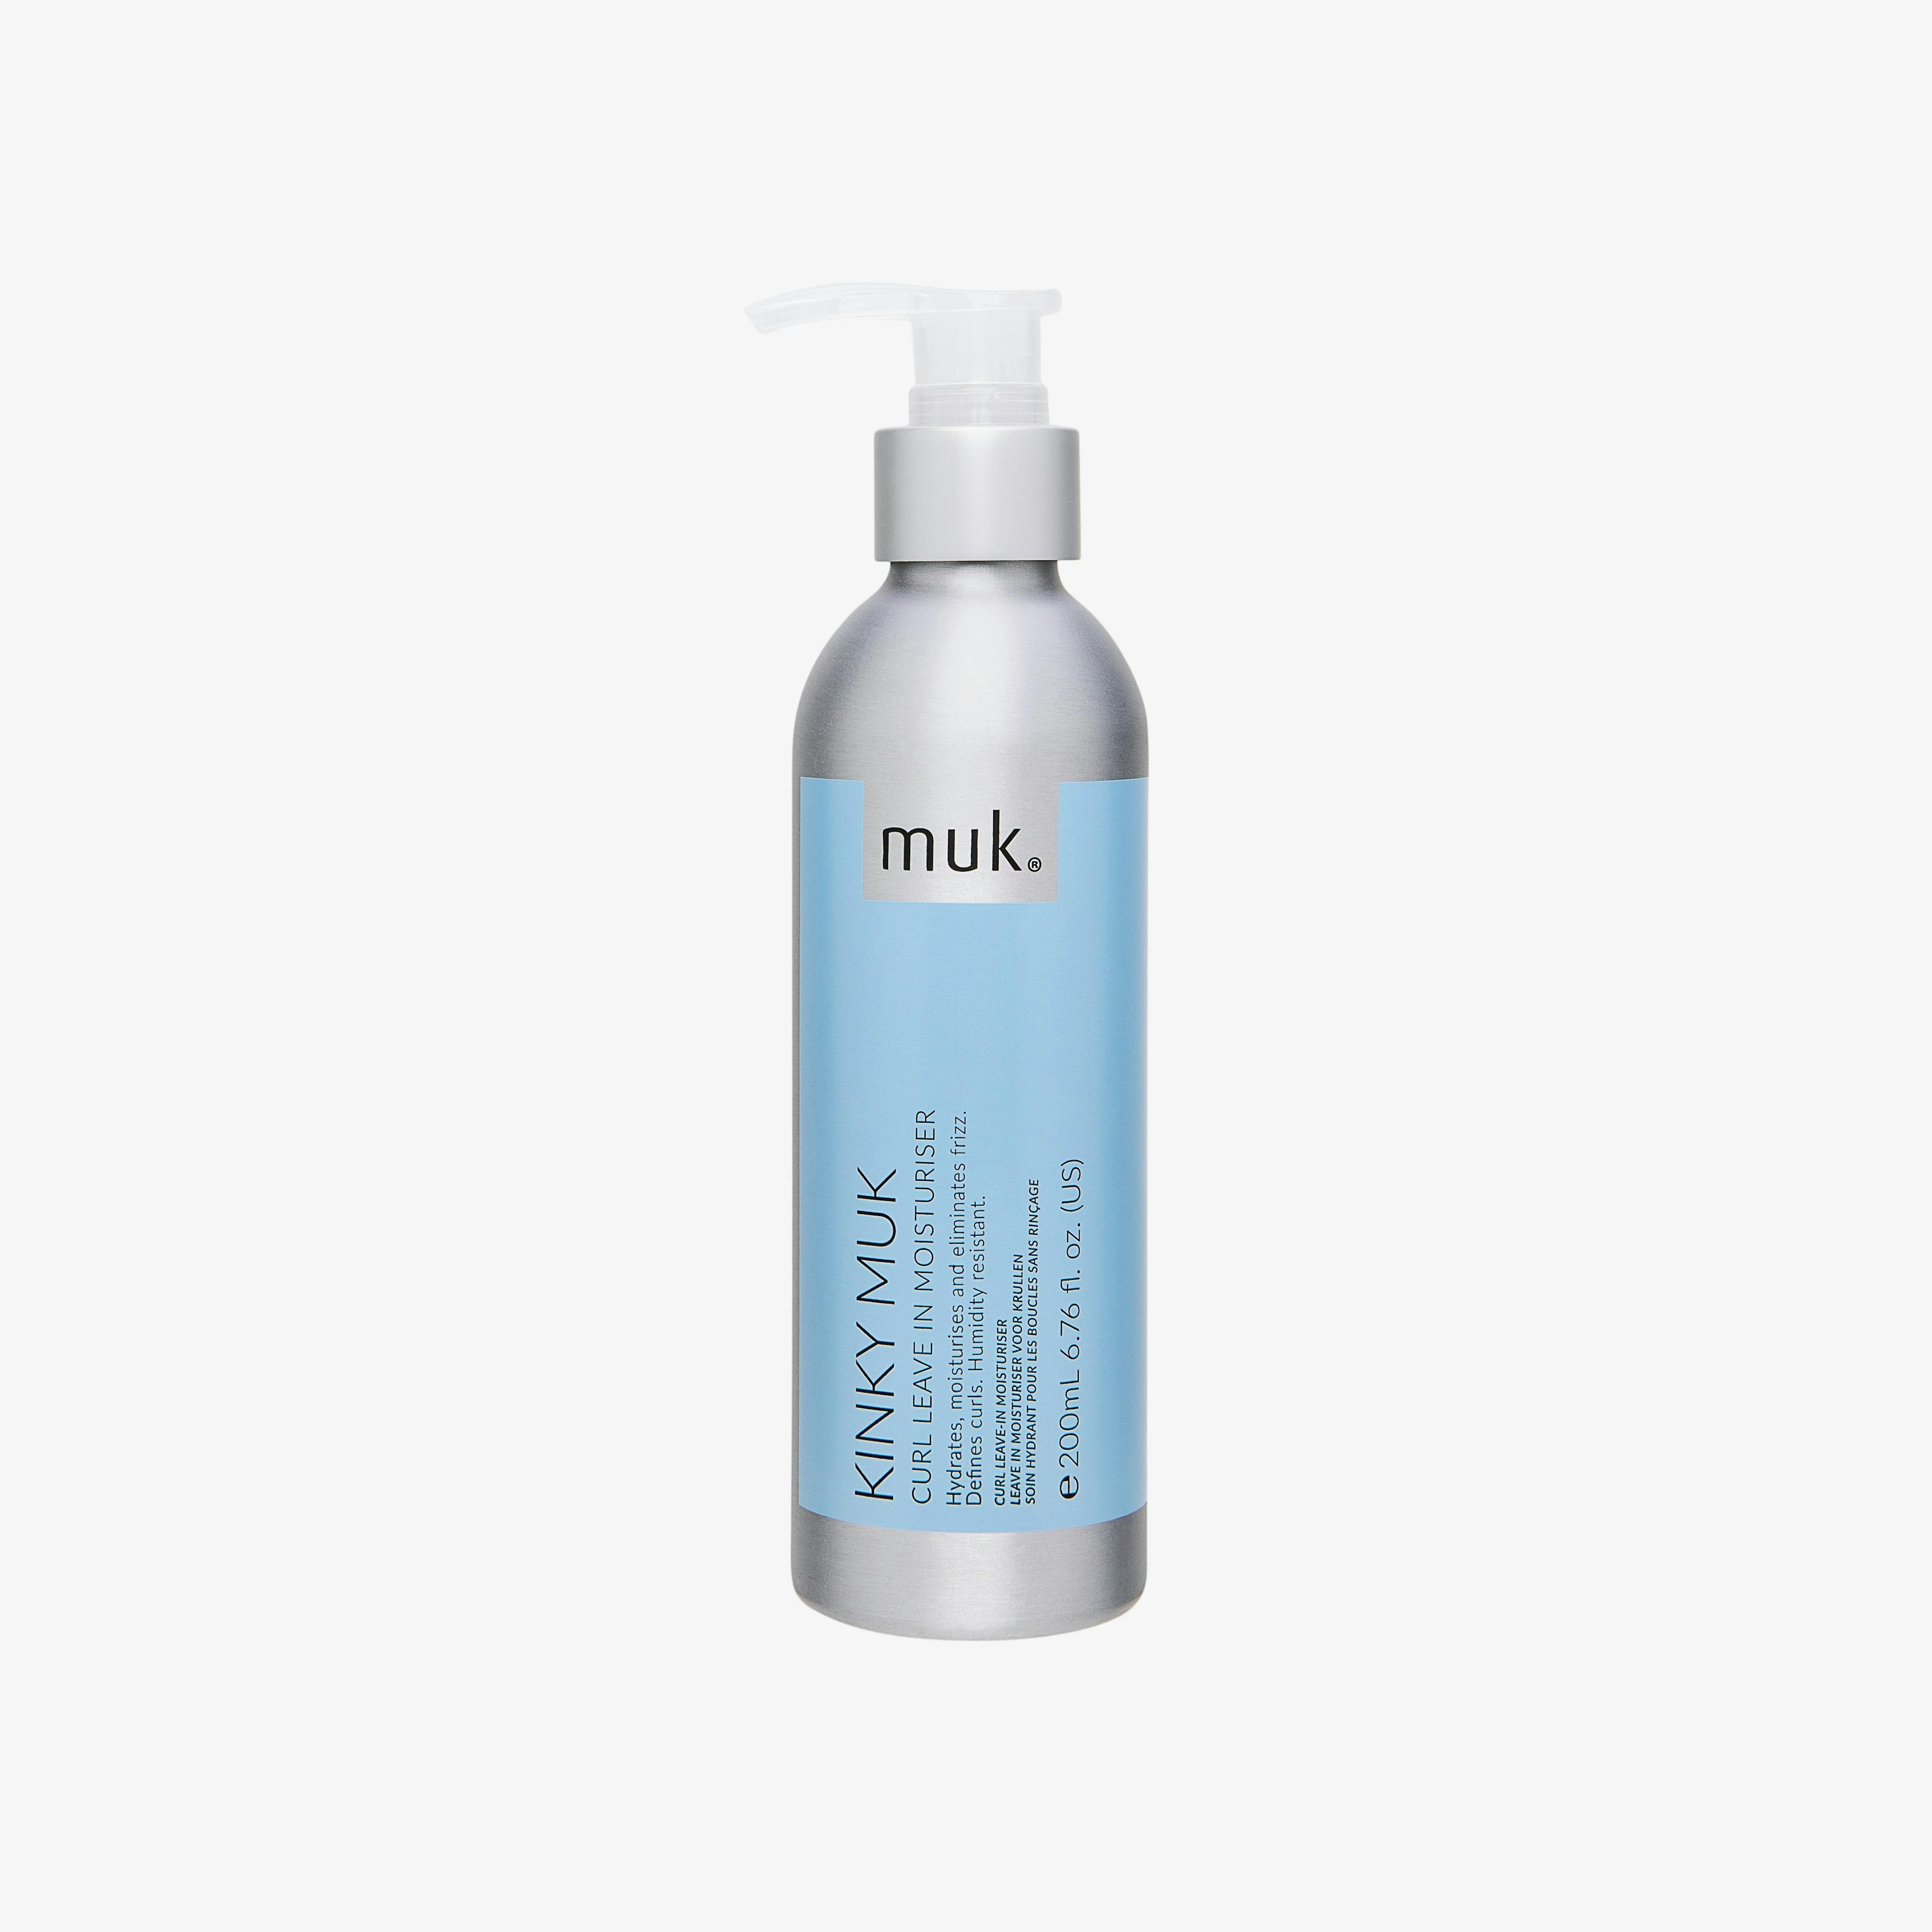 Muk Kinky Muk Curl Leave in Moisturiser and Curl Amplifier 200ml Duo Pack